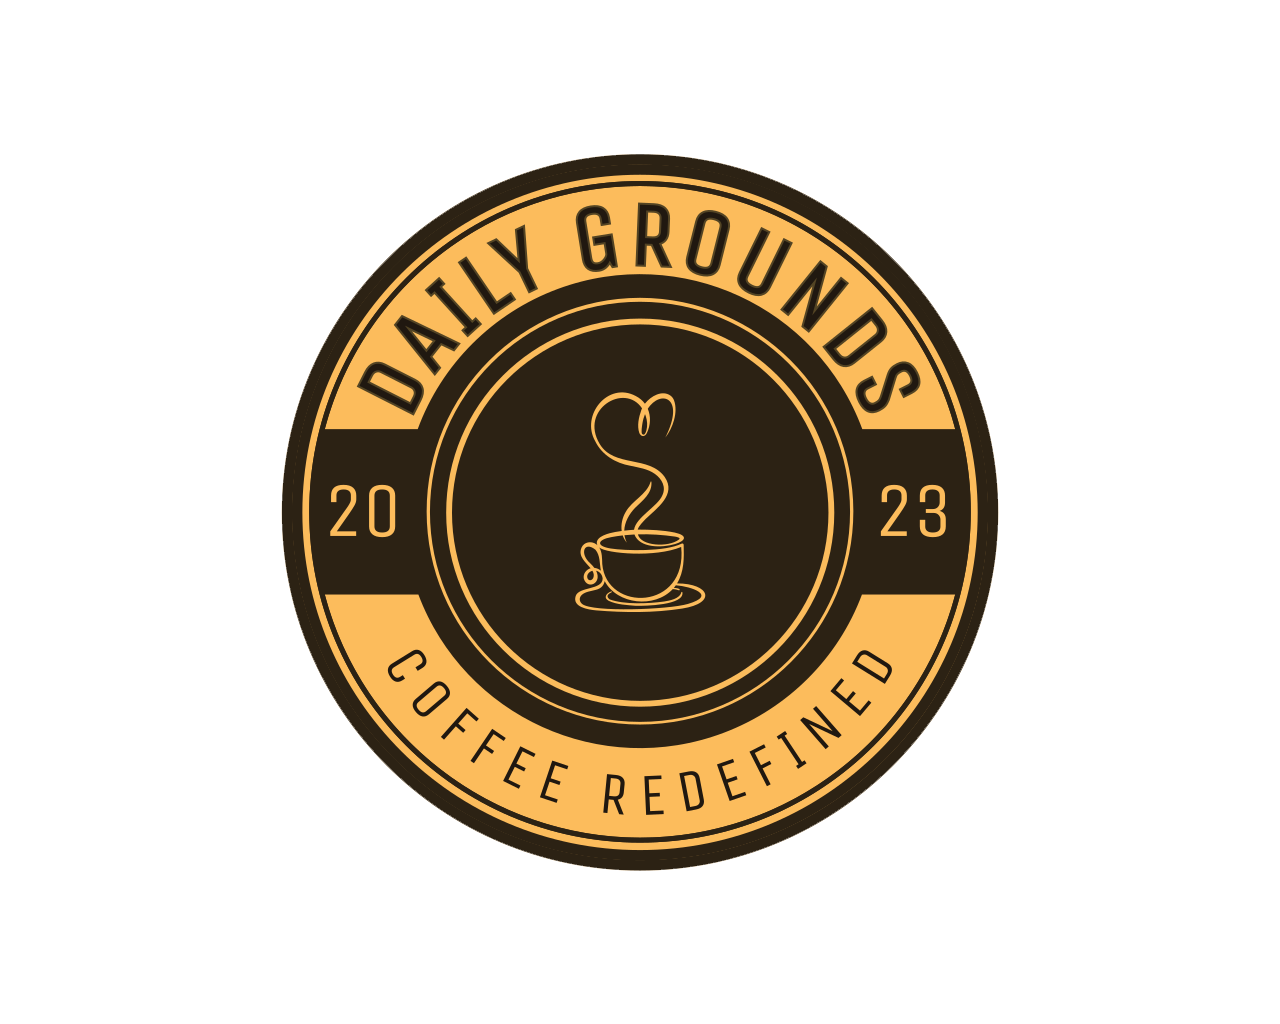 Daily Grounds